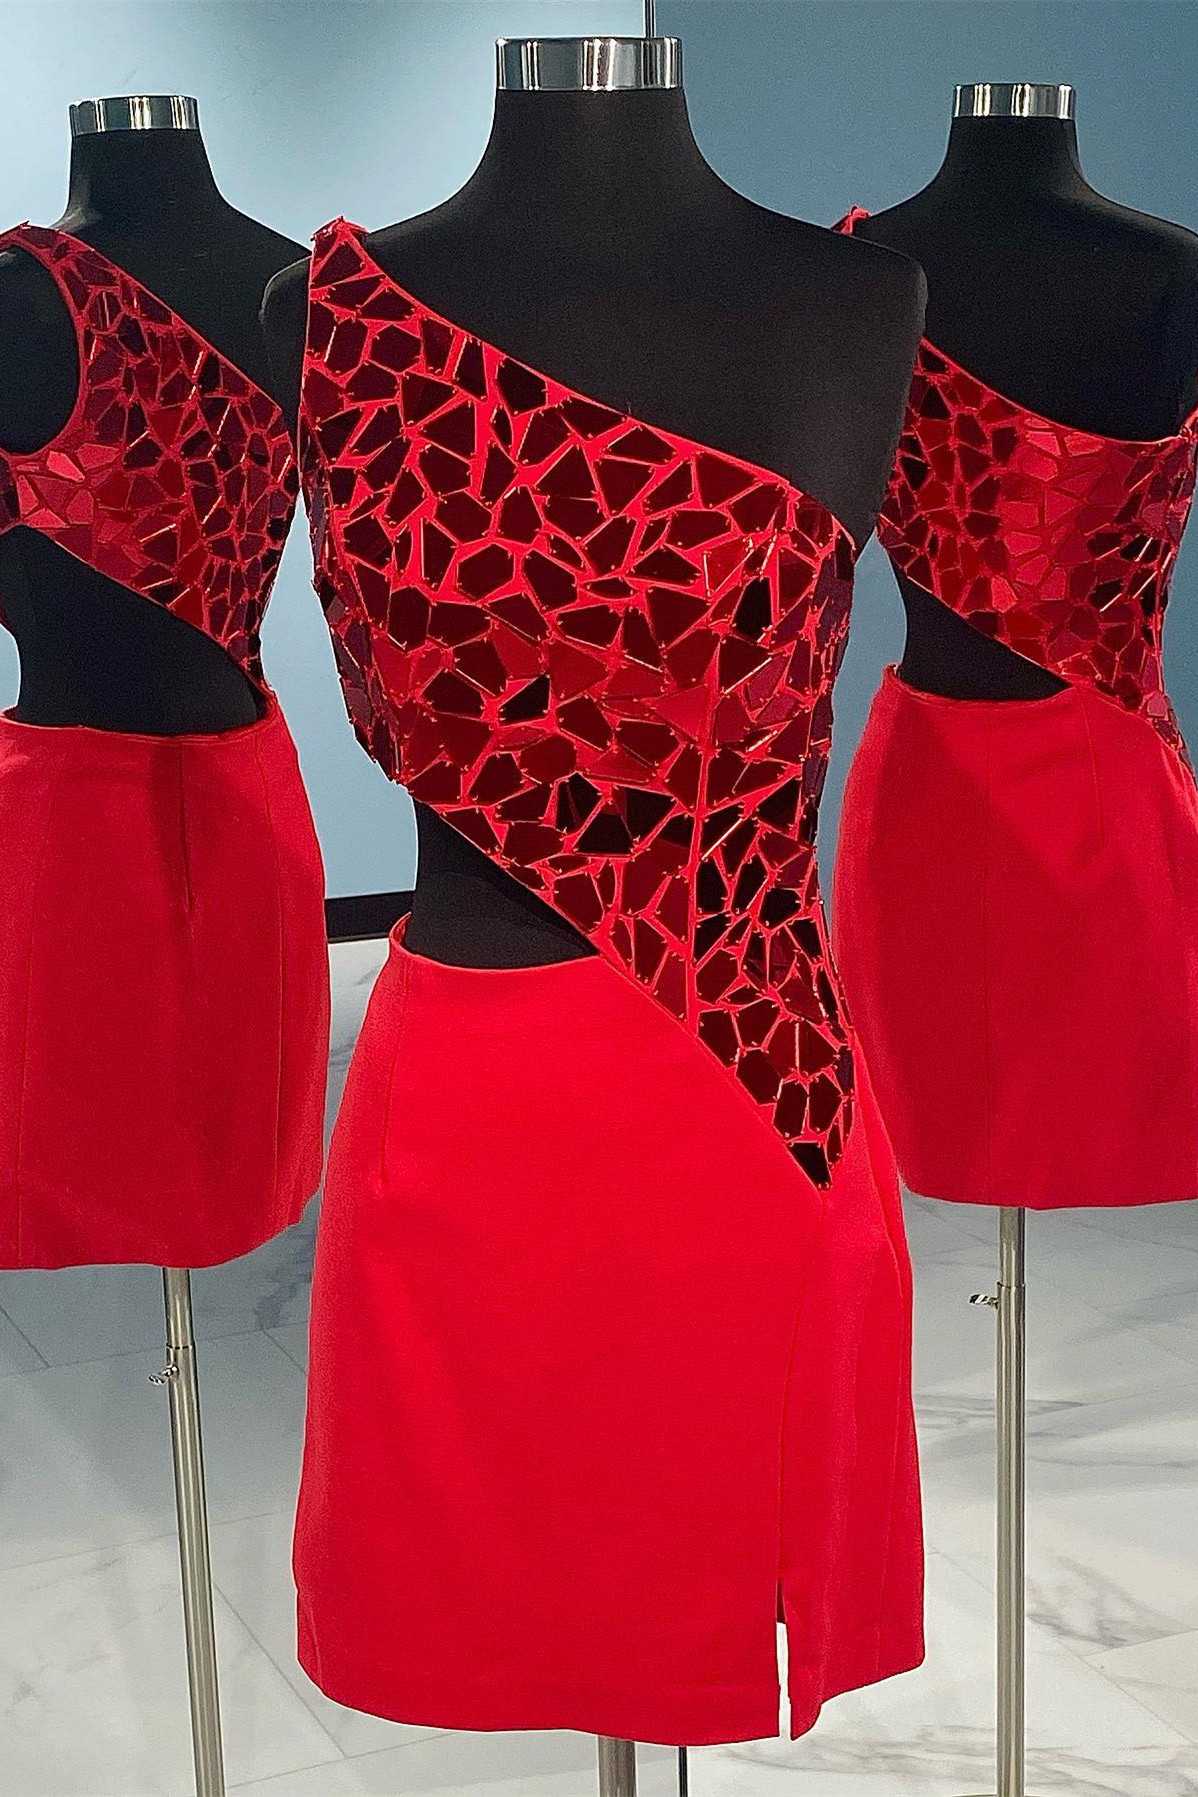 Red Cut Glass Mirror One-Shoulder Cutout Corset Homecoming Dress outfit, Bachelorette Party Games